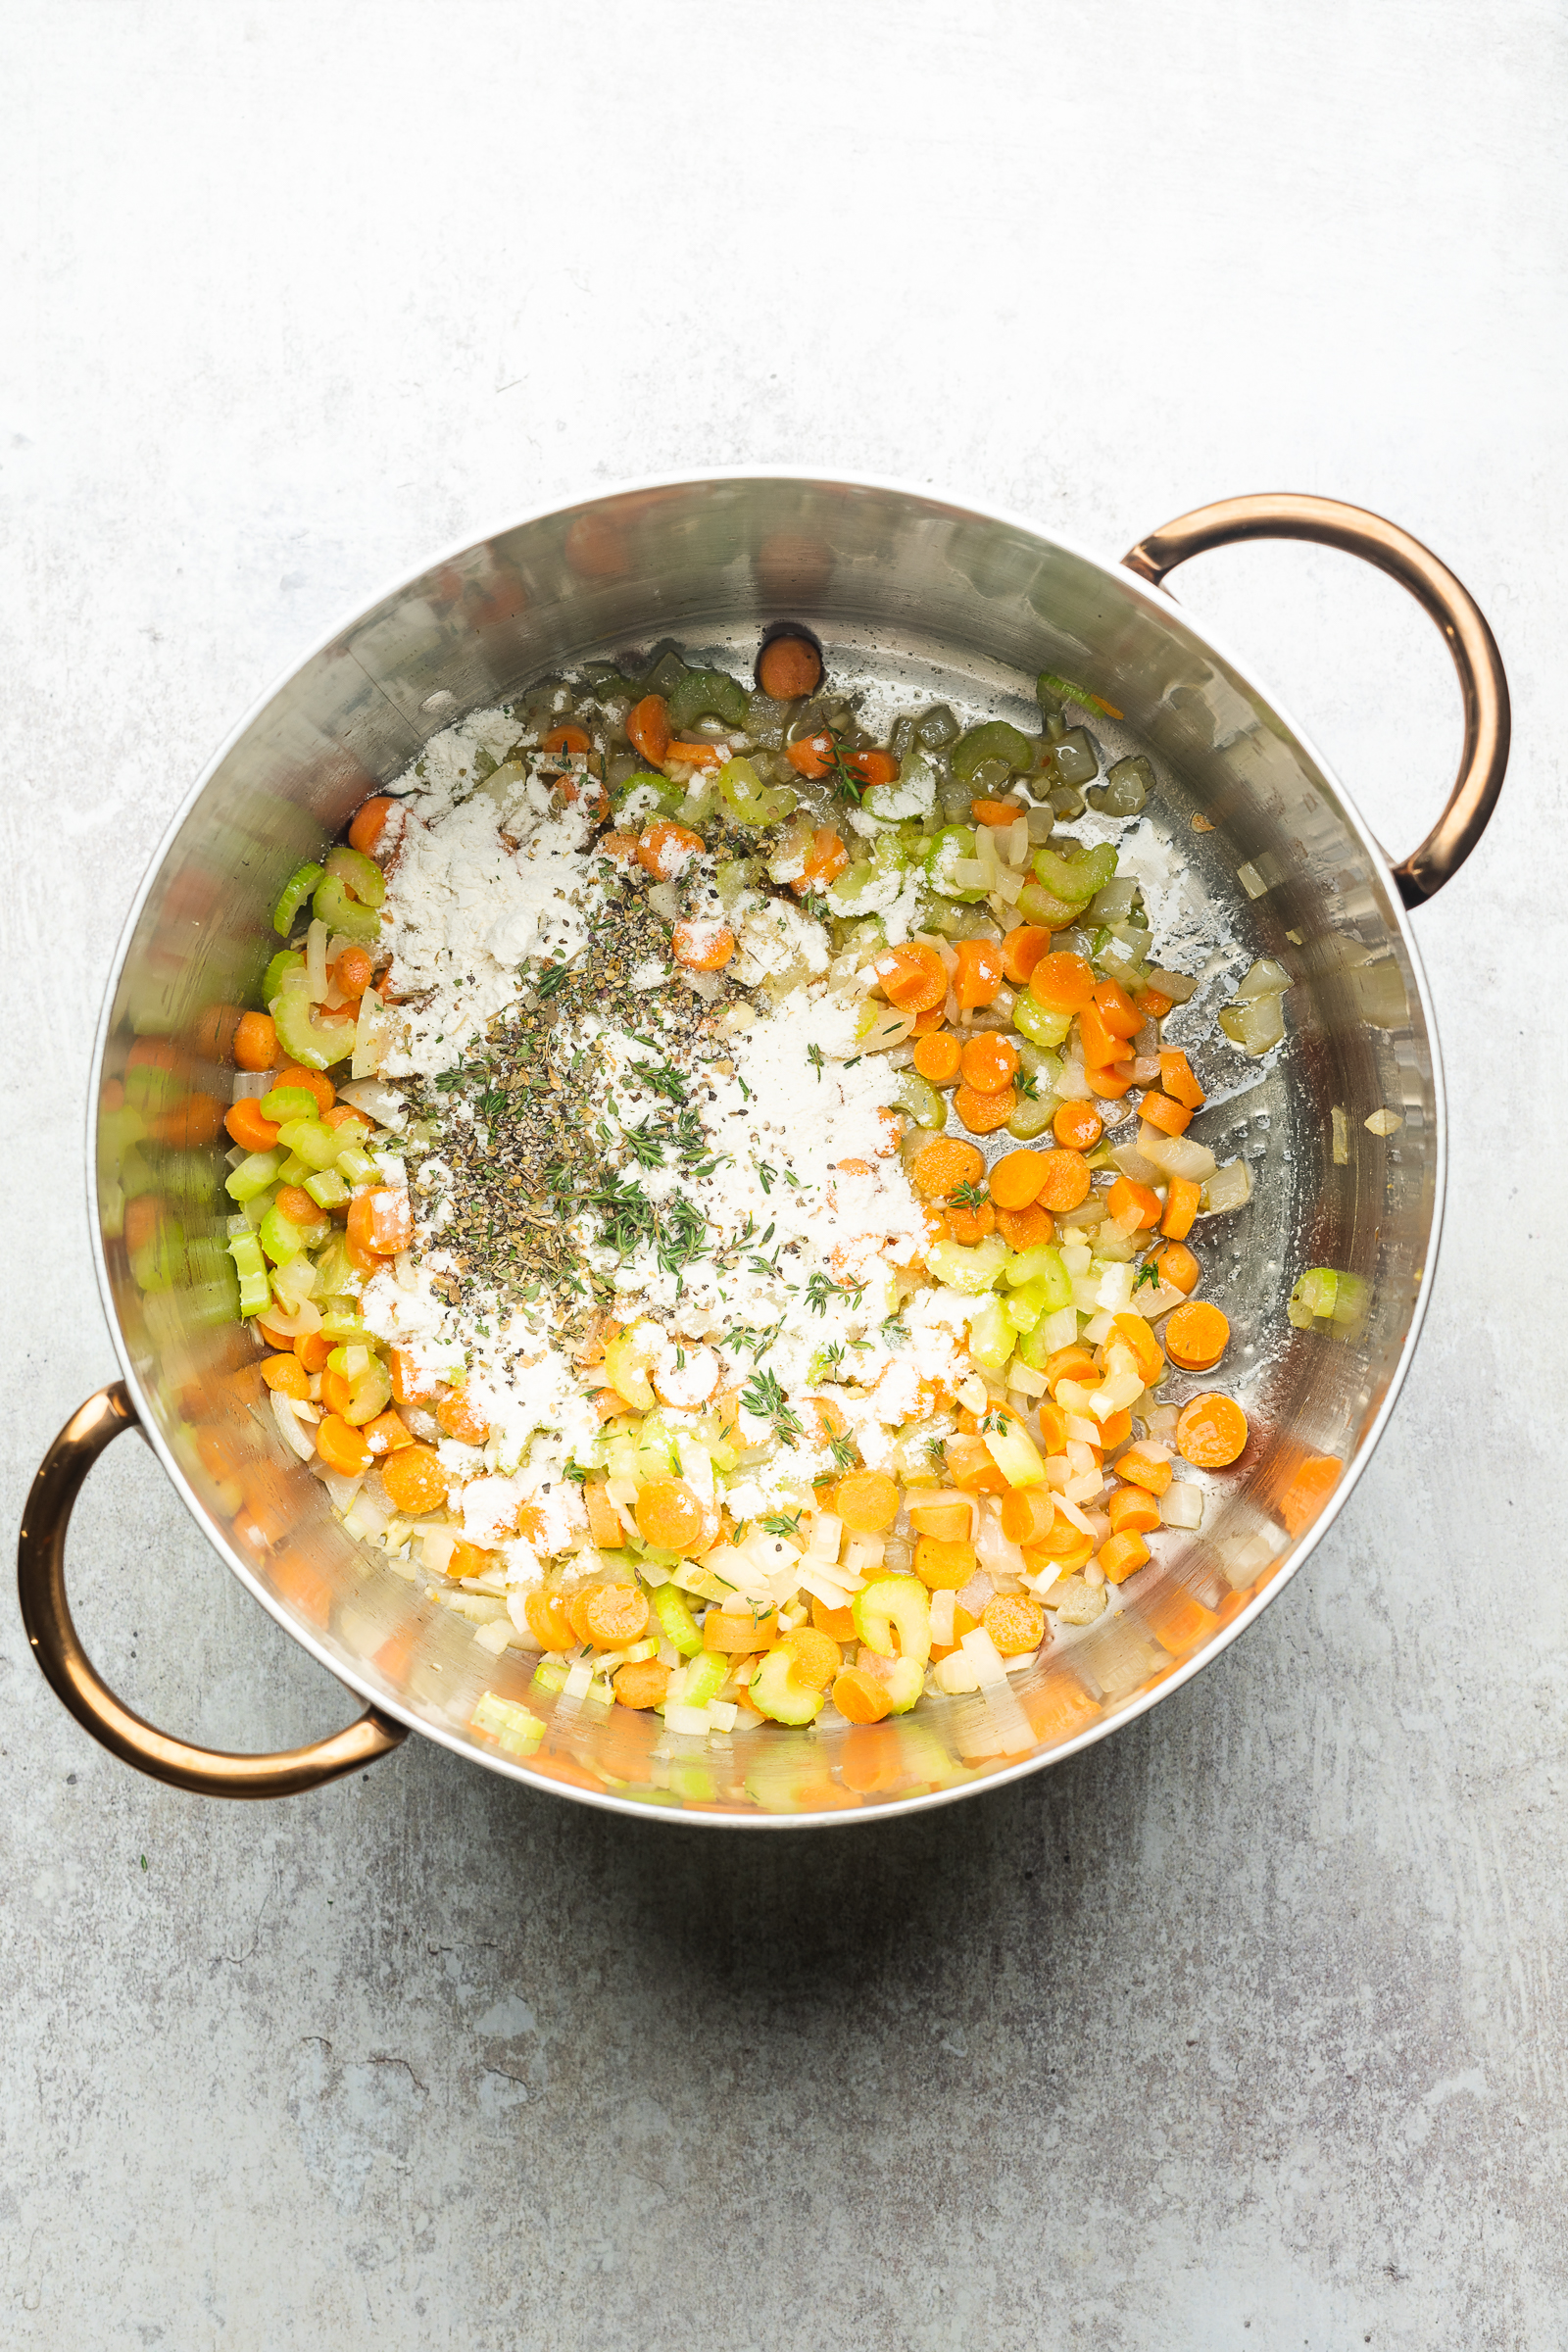 Cooked veggies, flour, and seasonings in a large soup pot.